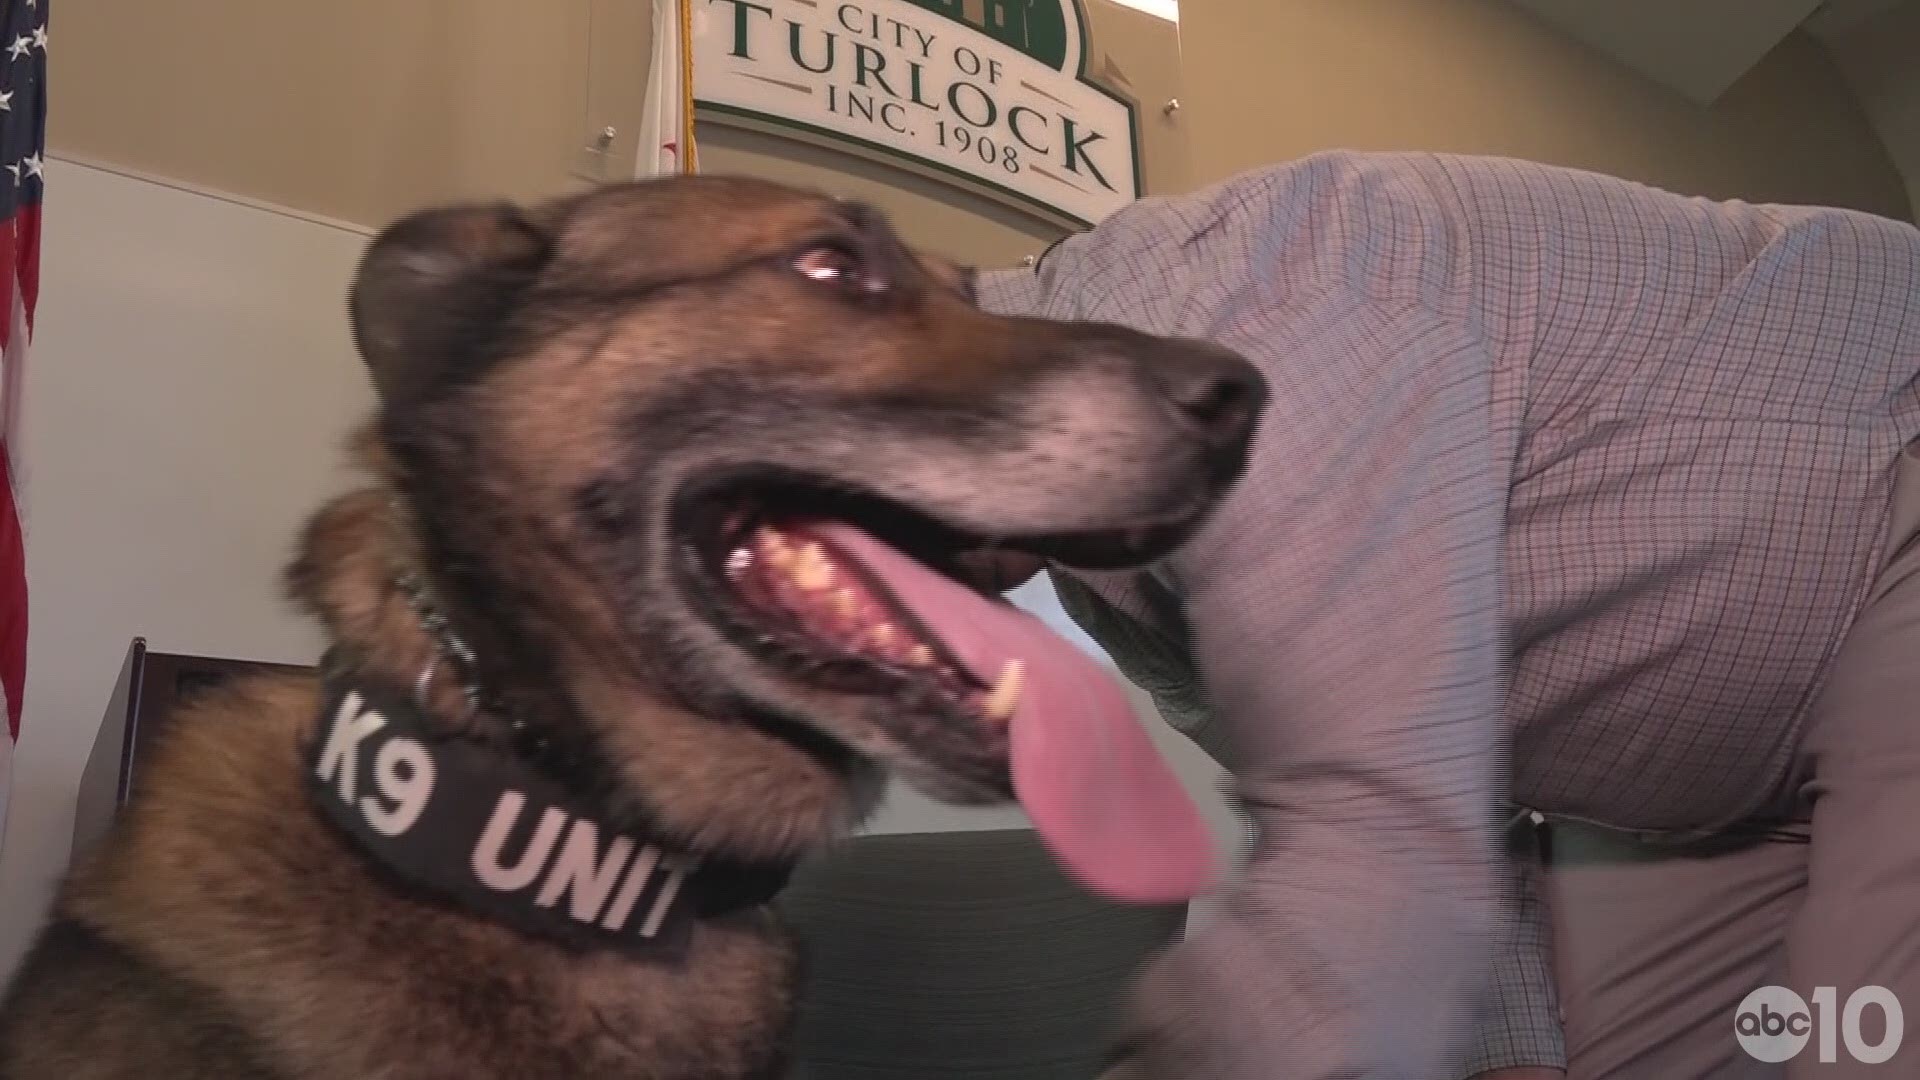 About a month ago, officers discovered a lump under K9 Varick's mouth, so they took him in for a biopsy. They later learned it was a form of cancer on which vets couldn't operate.